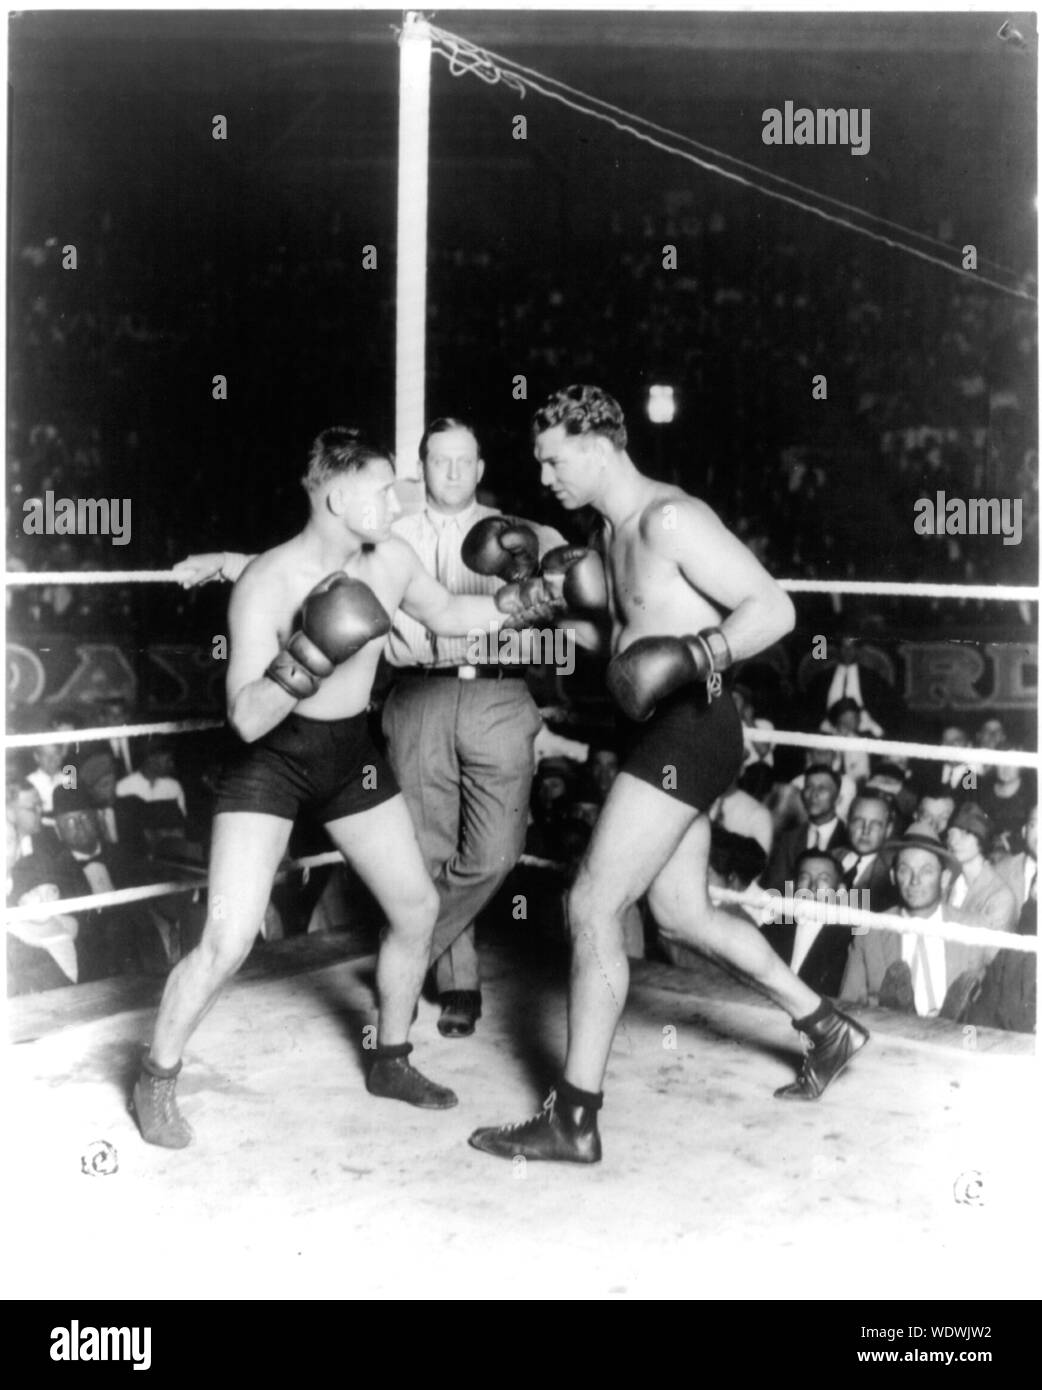 Gus Wilson, Jack Dempsey, Ray Newman, San Antonio, Tex., Sept. 25, 1925 Photograph shows Jack Dempsey preparing to exchange punches with Gus Wilson in boxing ring in front of large crowd referee, Ray Newman, leaning against ropes watches. Stock Photo